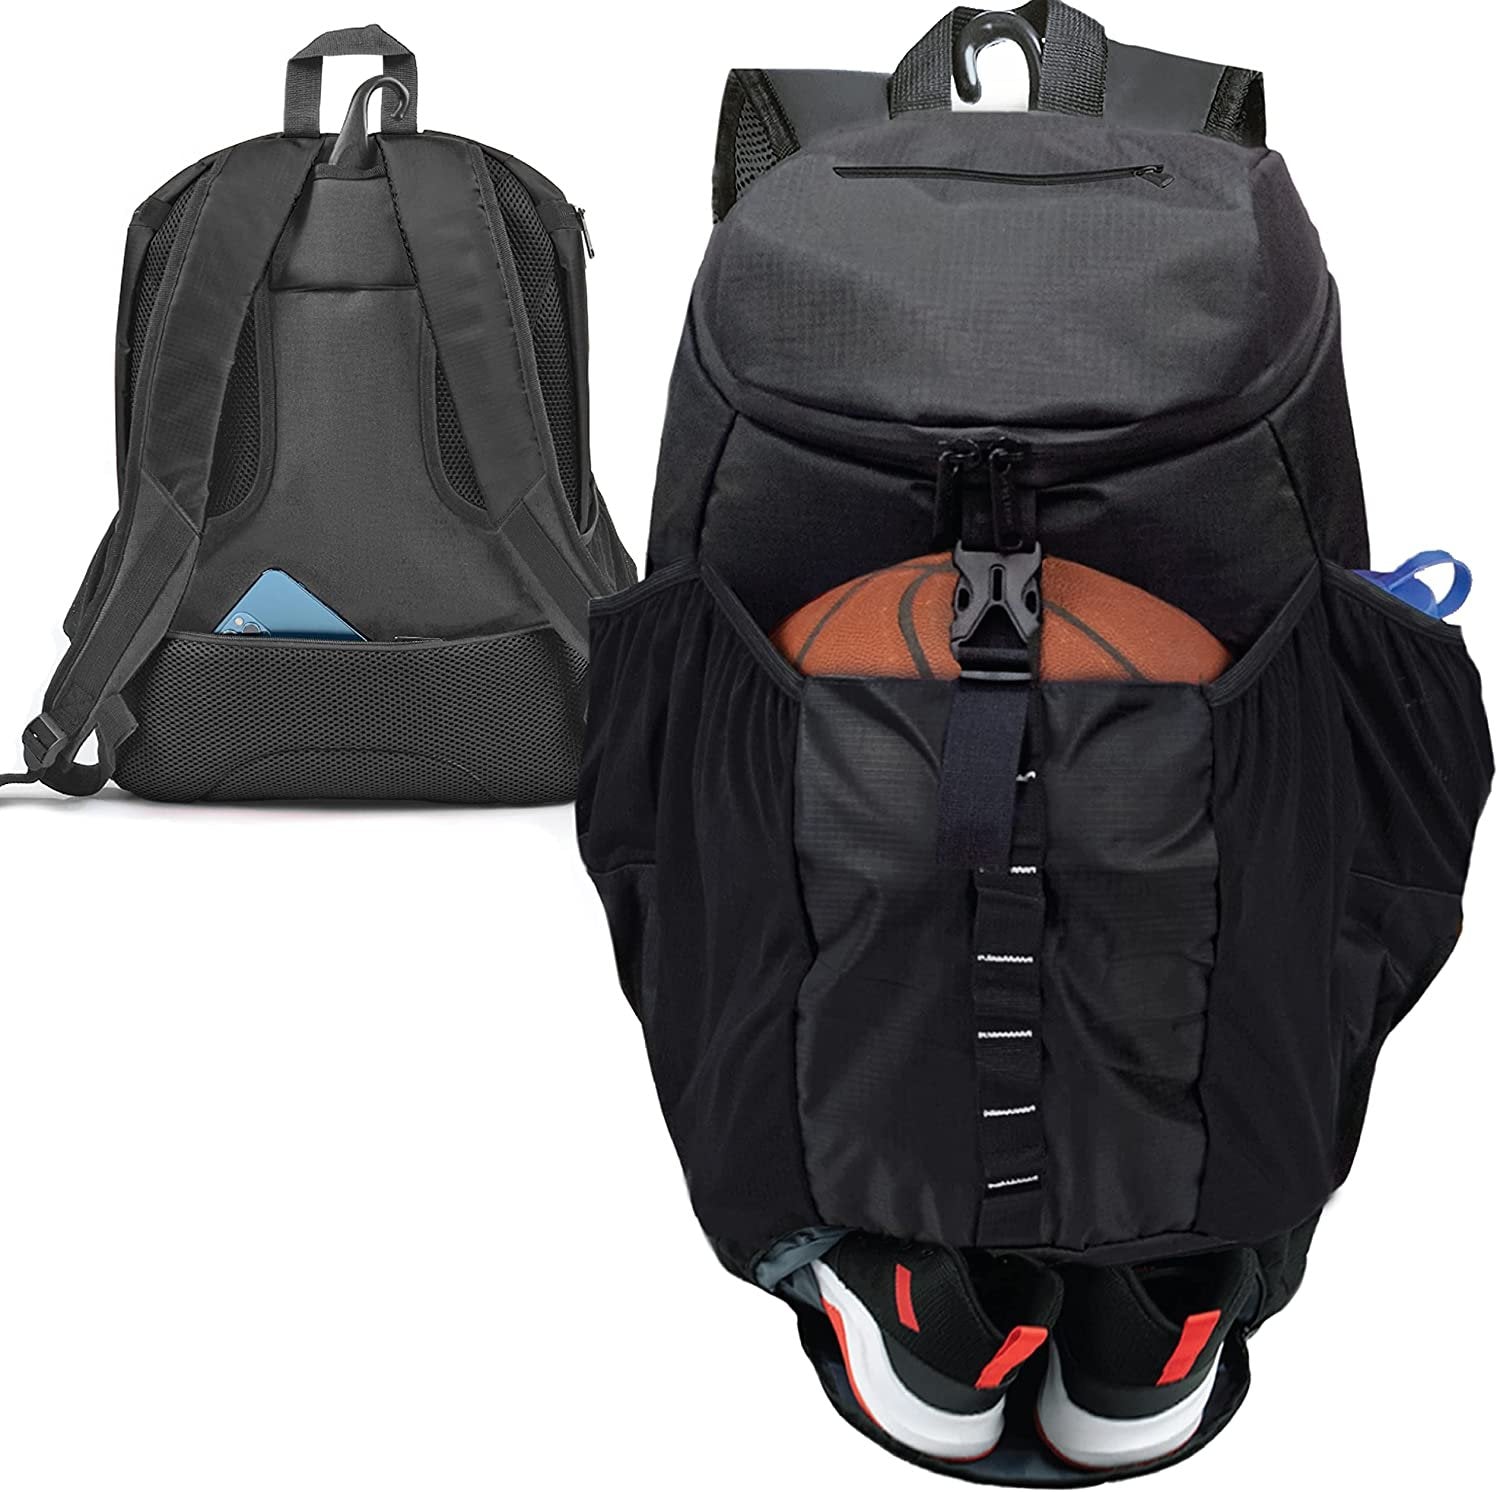 Large Black Athletico Basketball Bag Backpack for Men Women Youth - Volleyball & Soccer - Free Shipping & Returns